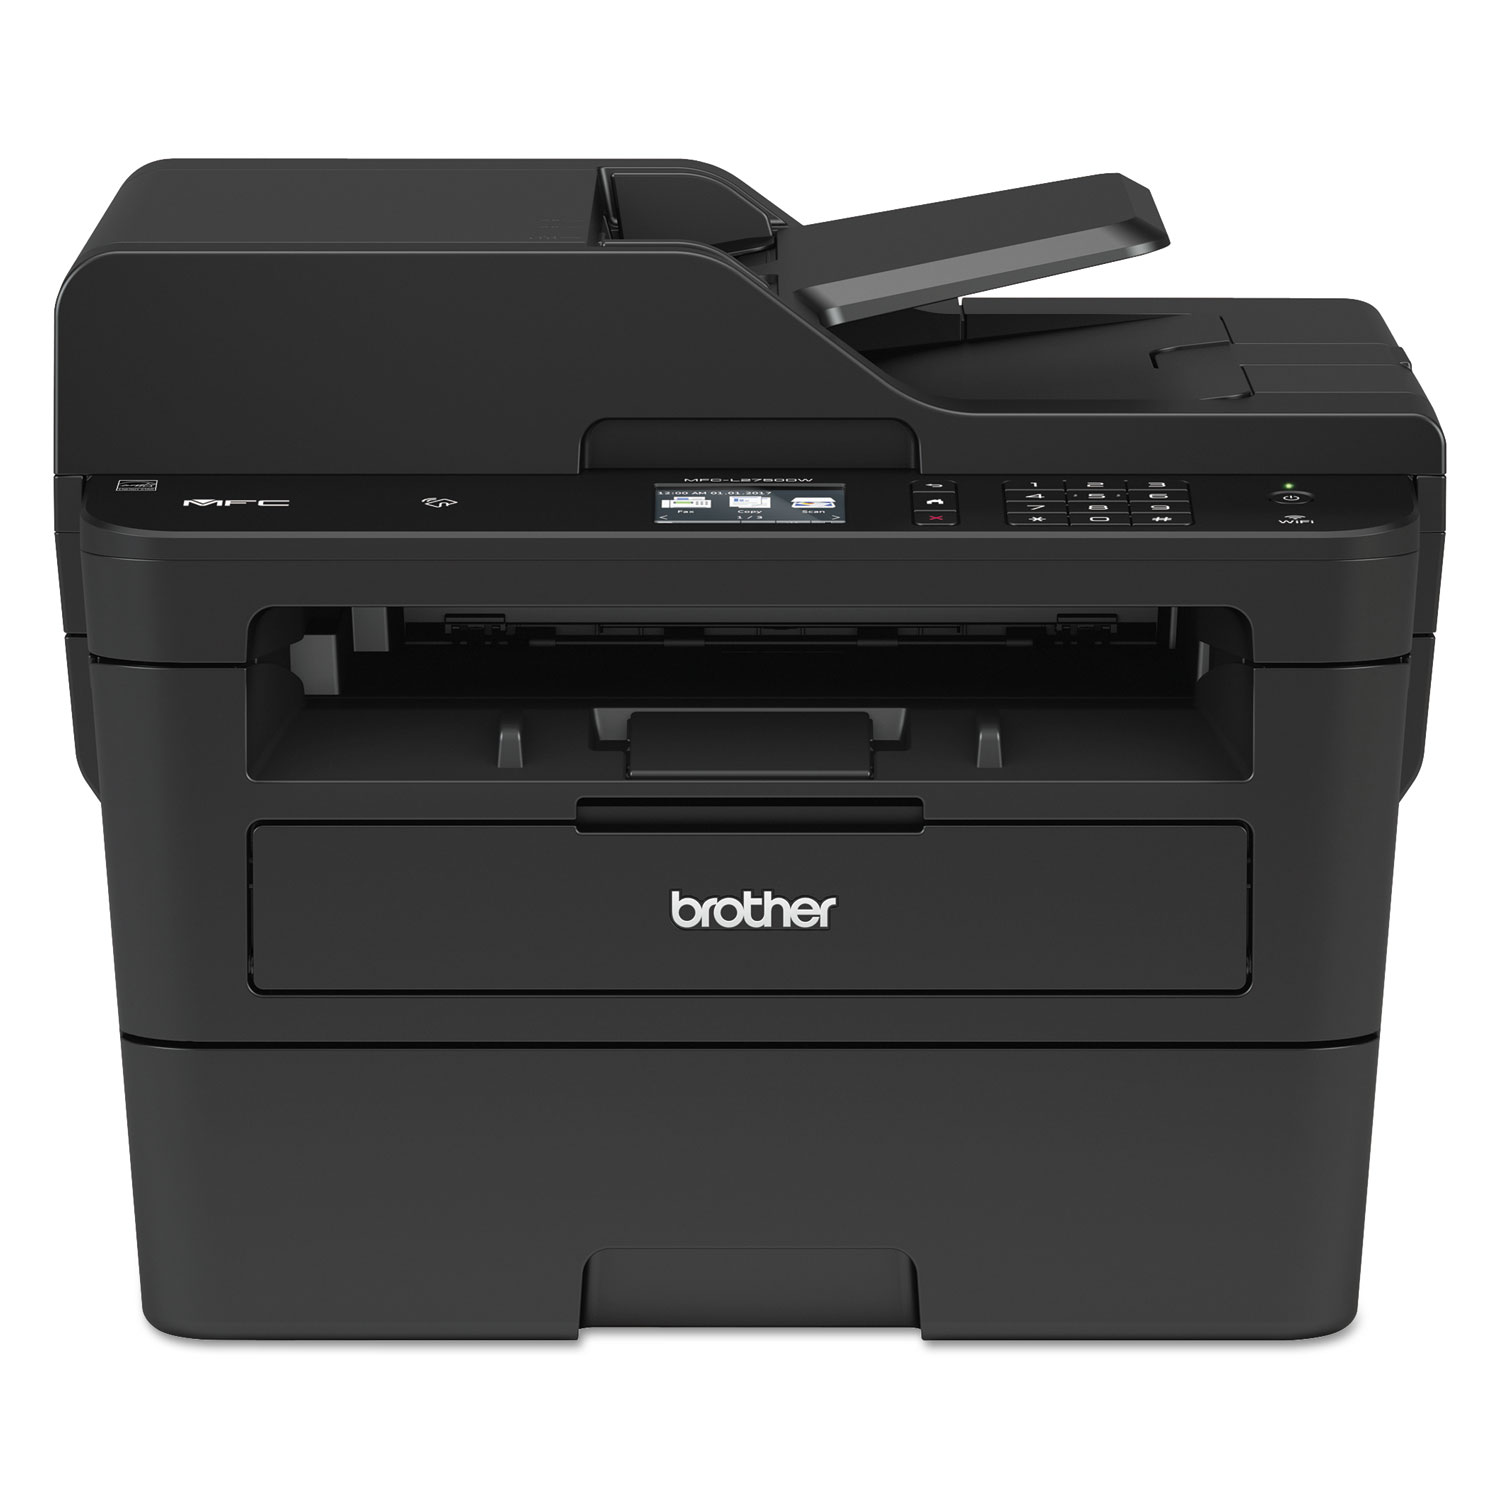  Brother MFCL2750DW MFCL2750DW Compact Laser All-in-One Printer with Single-Pass Duplex Copy and Scan, Wireless and NFC (BRTMFCL2750DW) 